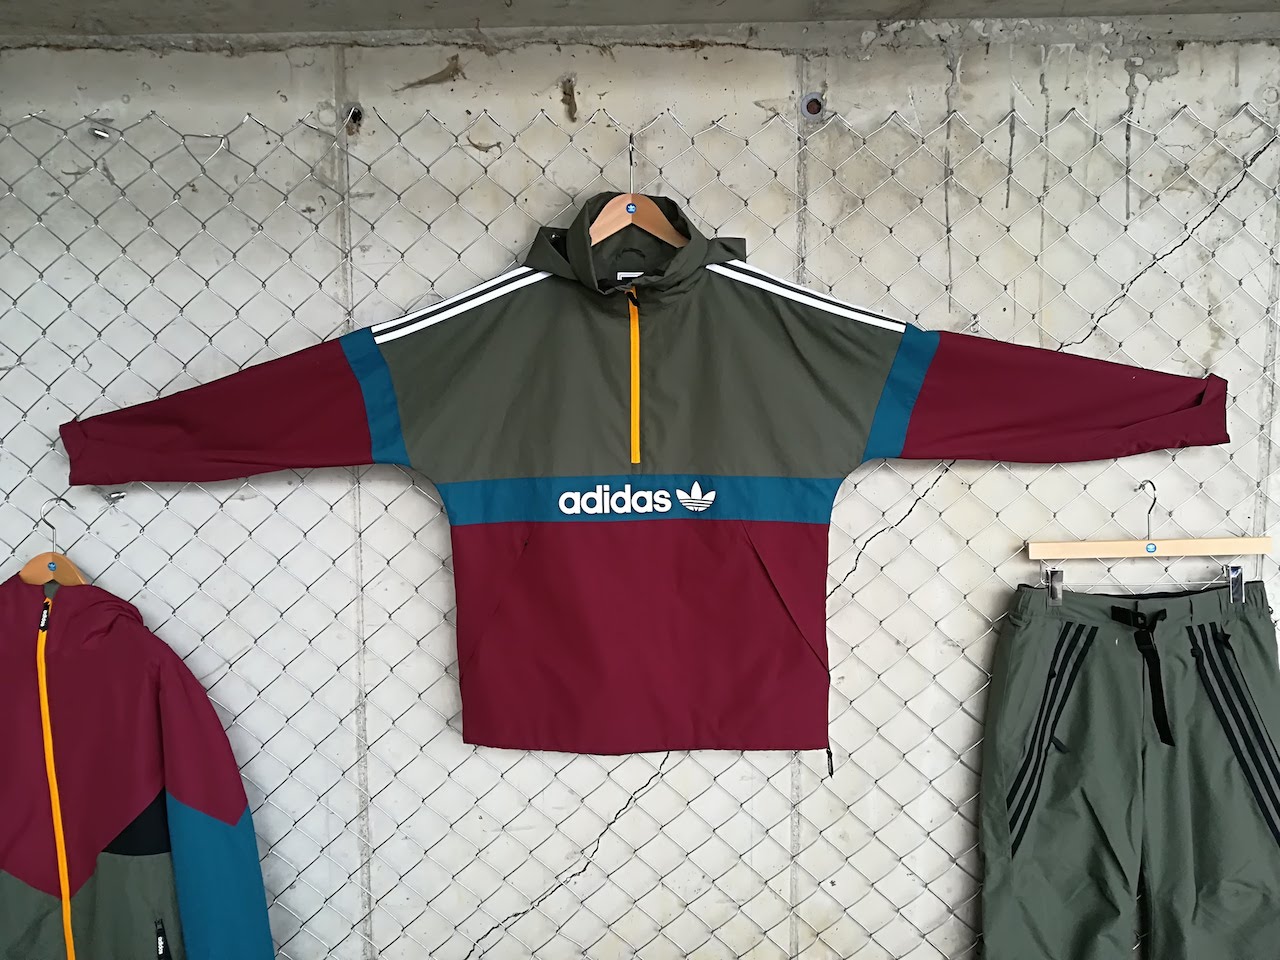 The Snow Breaker jacket is retro Adidas styling from the archives